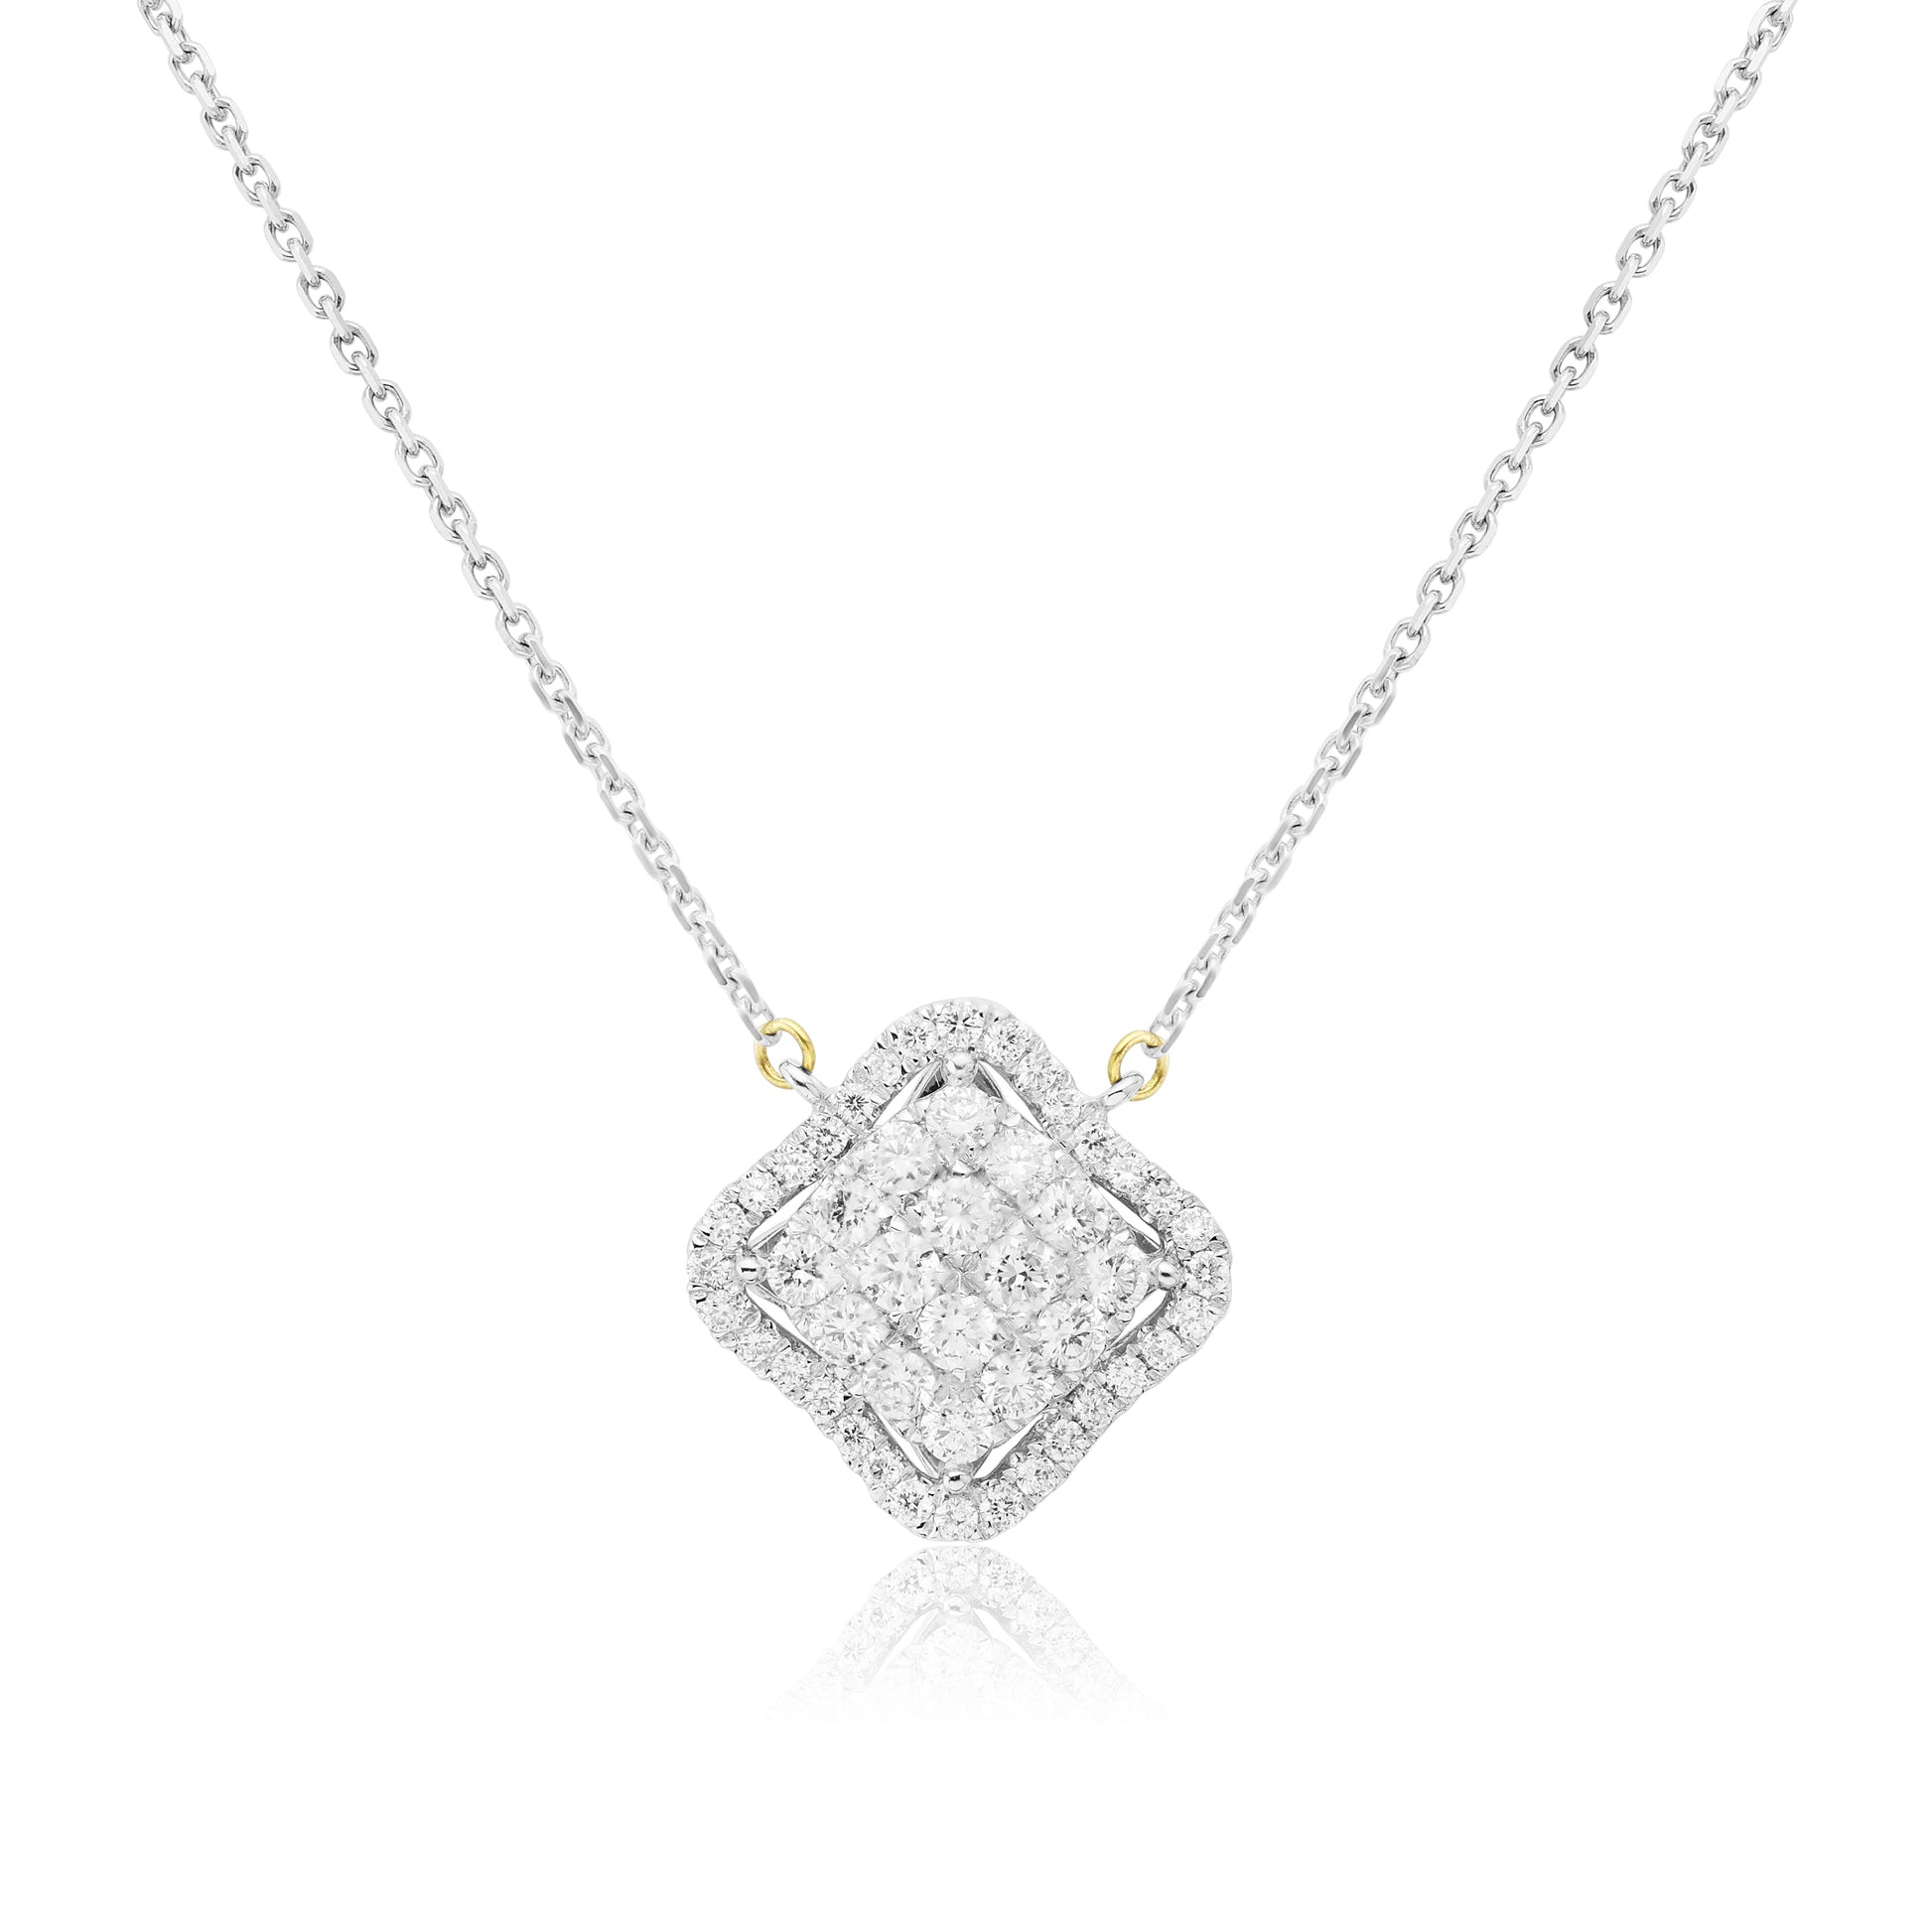 White Gold Necklaces White Gold Square Halo Pendant With A Cluster Pendant dansonjewelers Danson Jewelers 